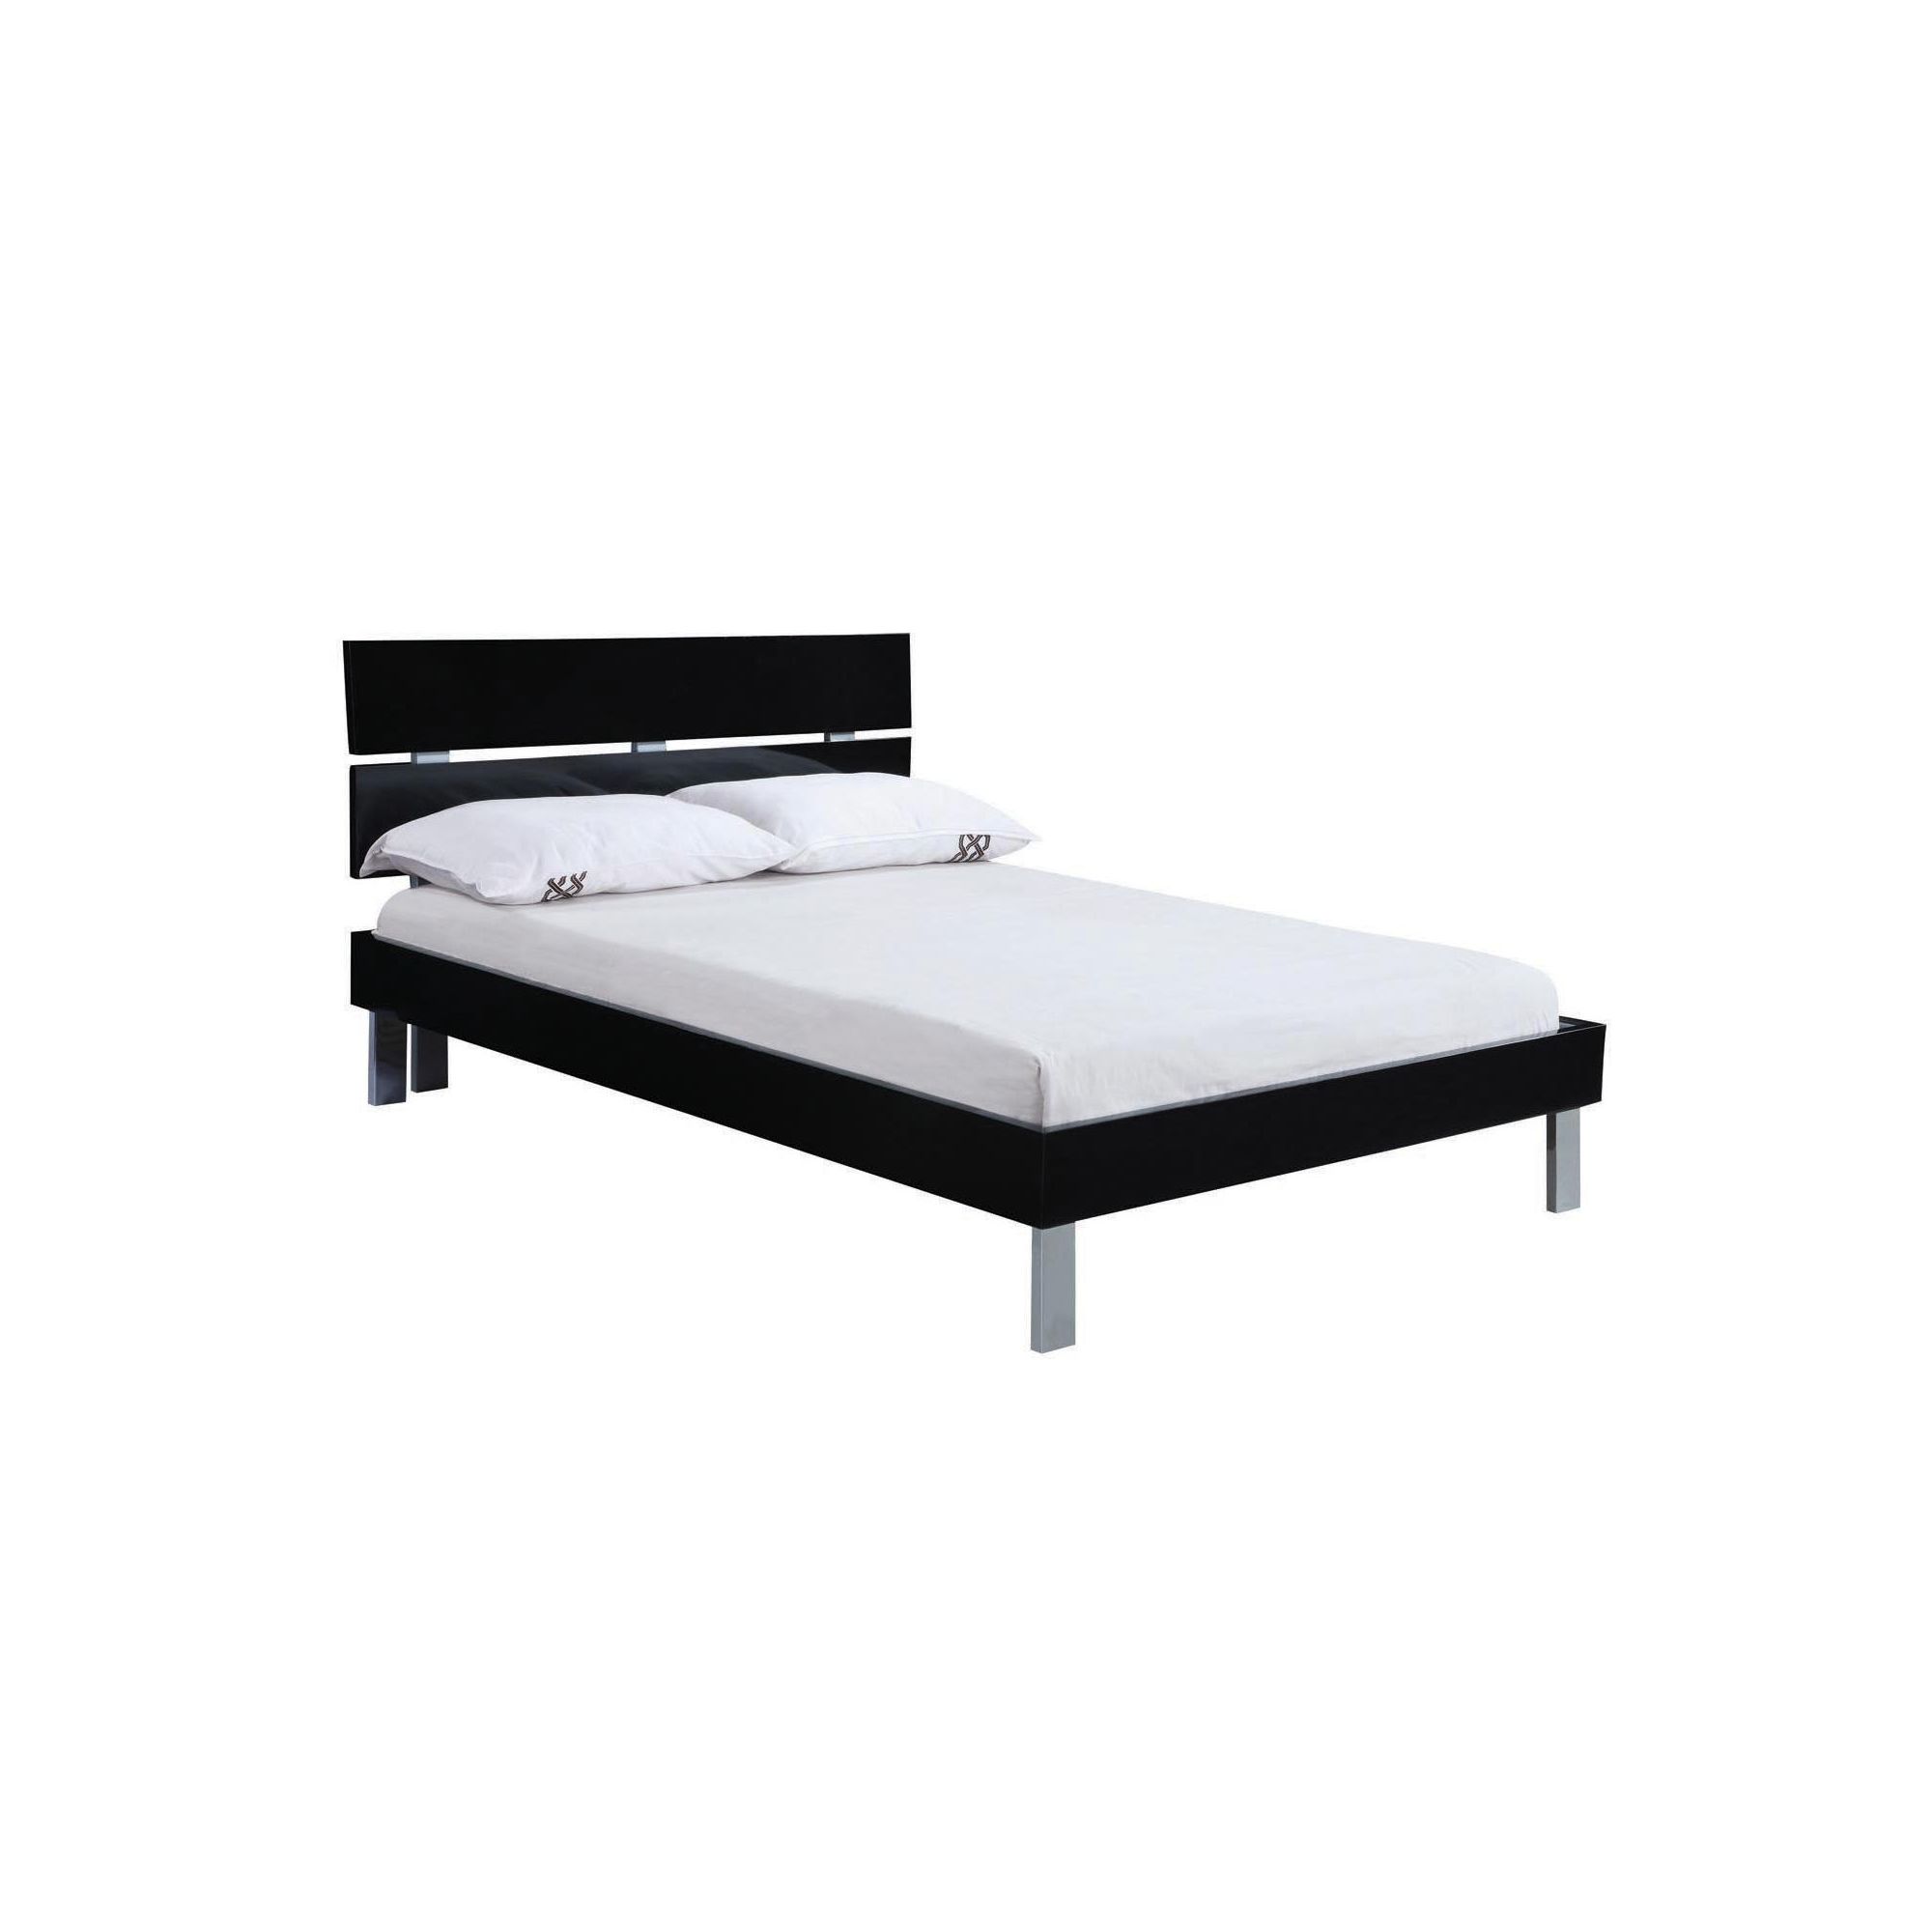 Home Zone Solar Bed Frame - Double - Black at Tesco Direct